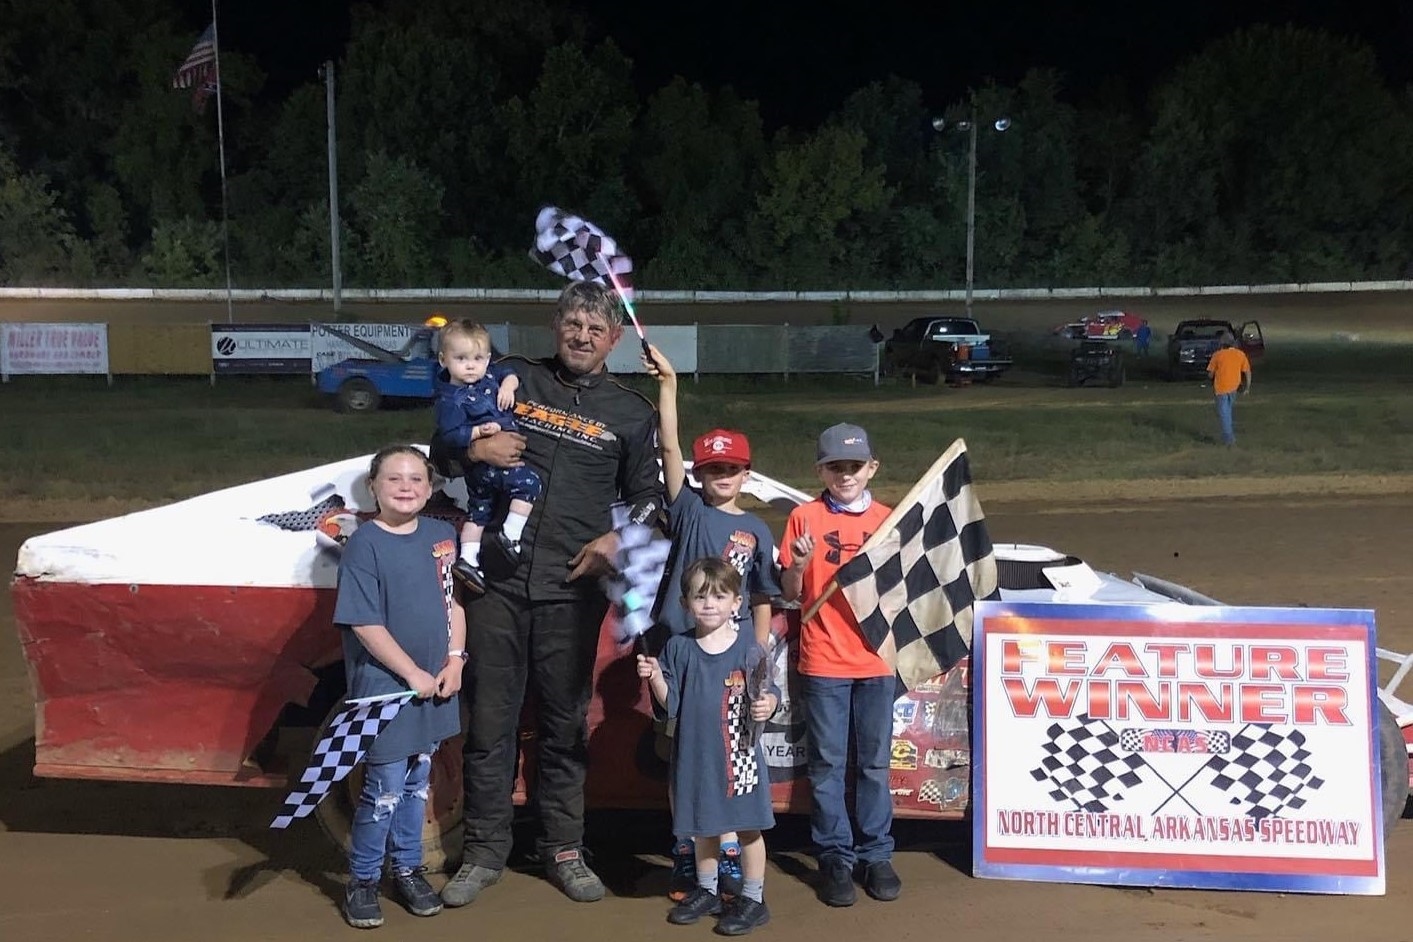 Stephen Muilenburg poses with his grandchildren and his race car after winning his 800th career race.